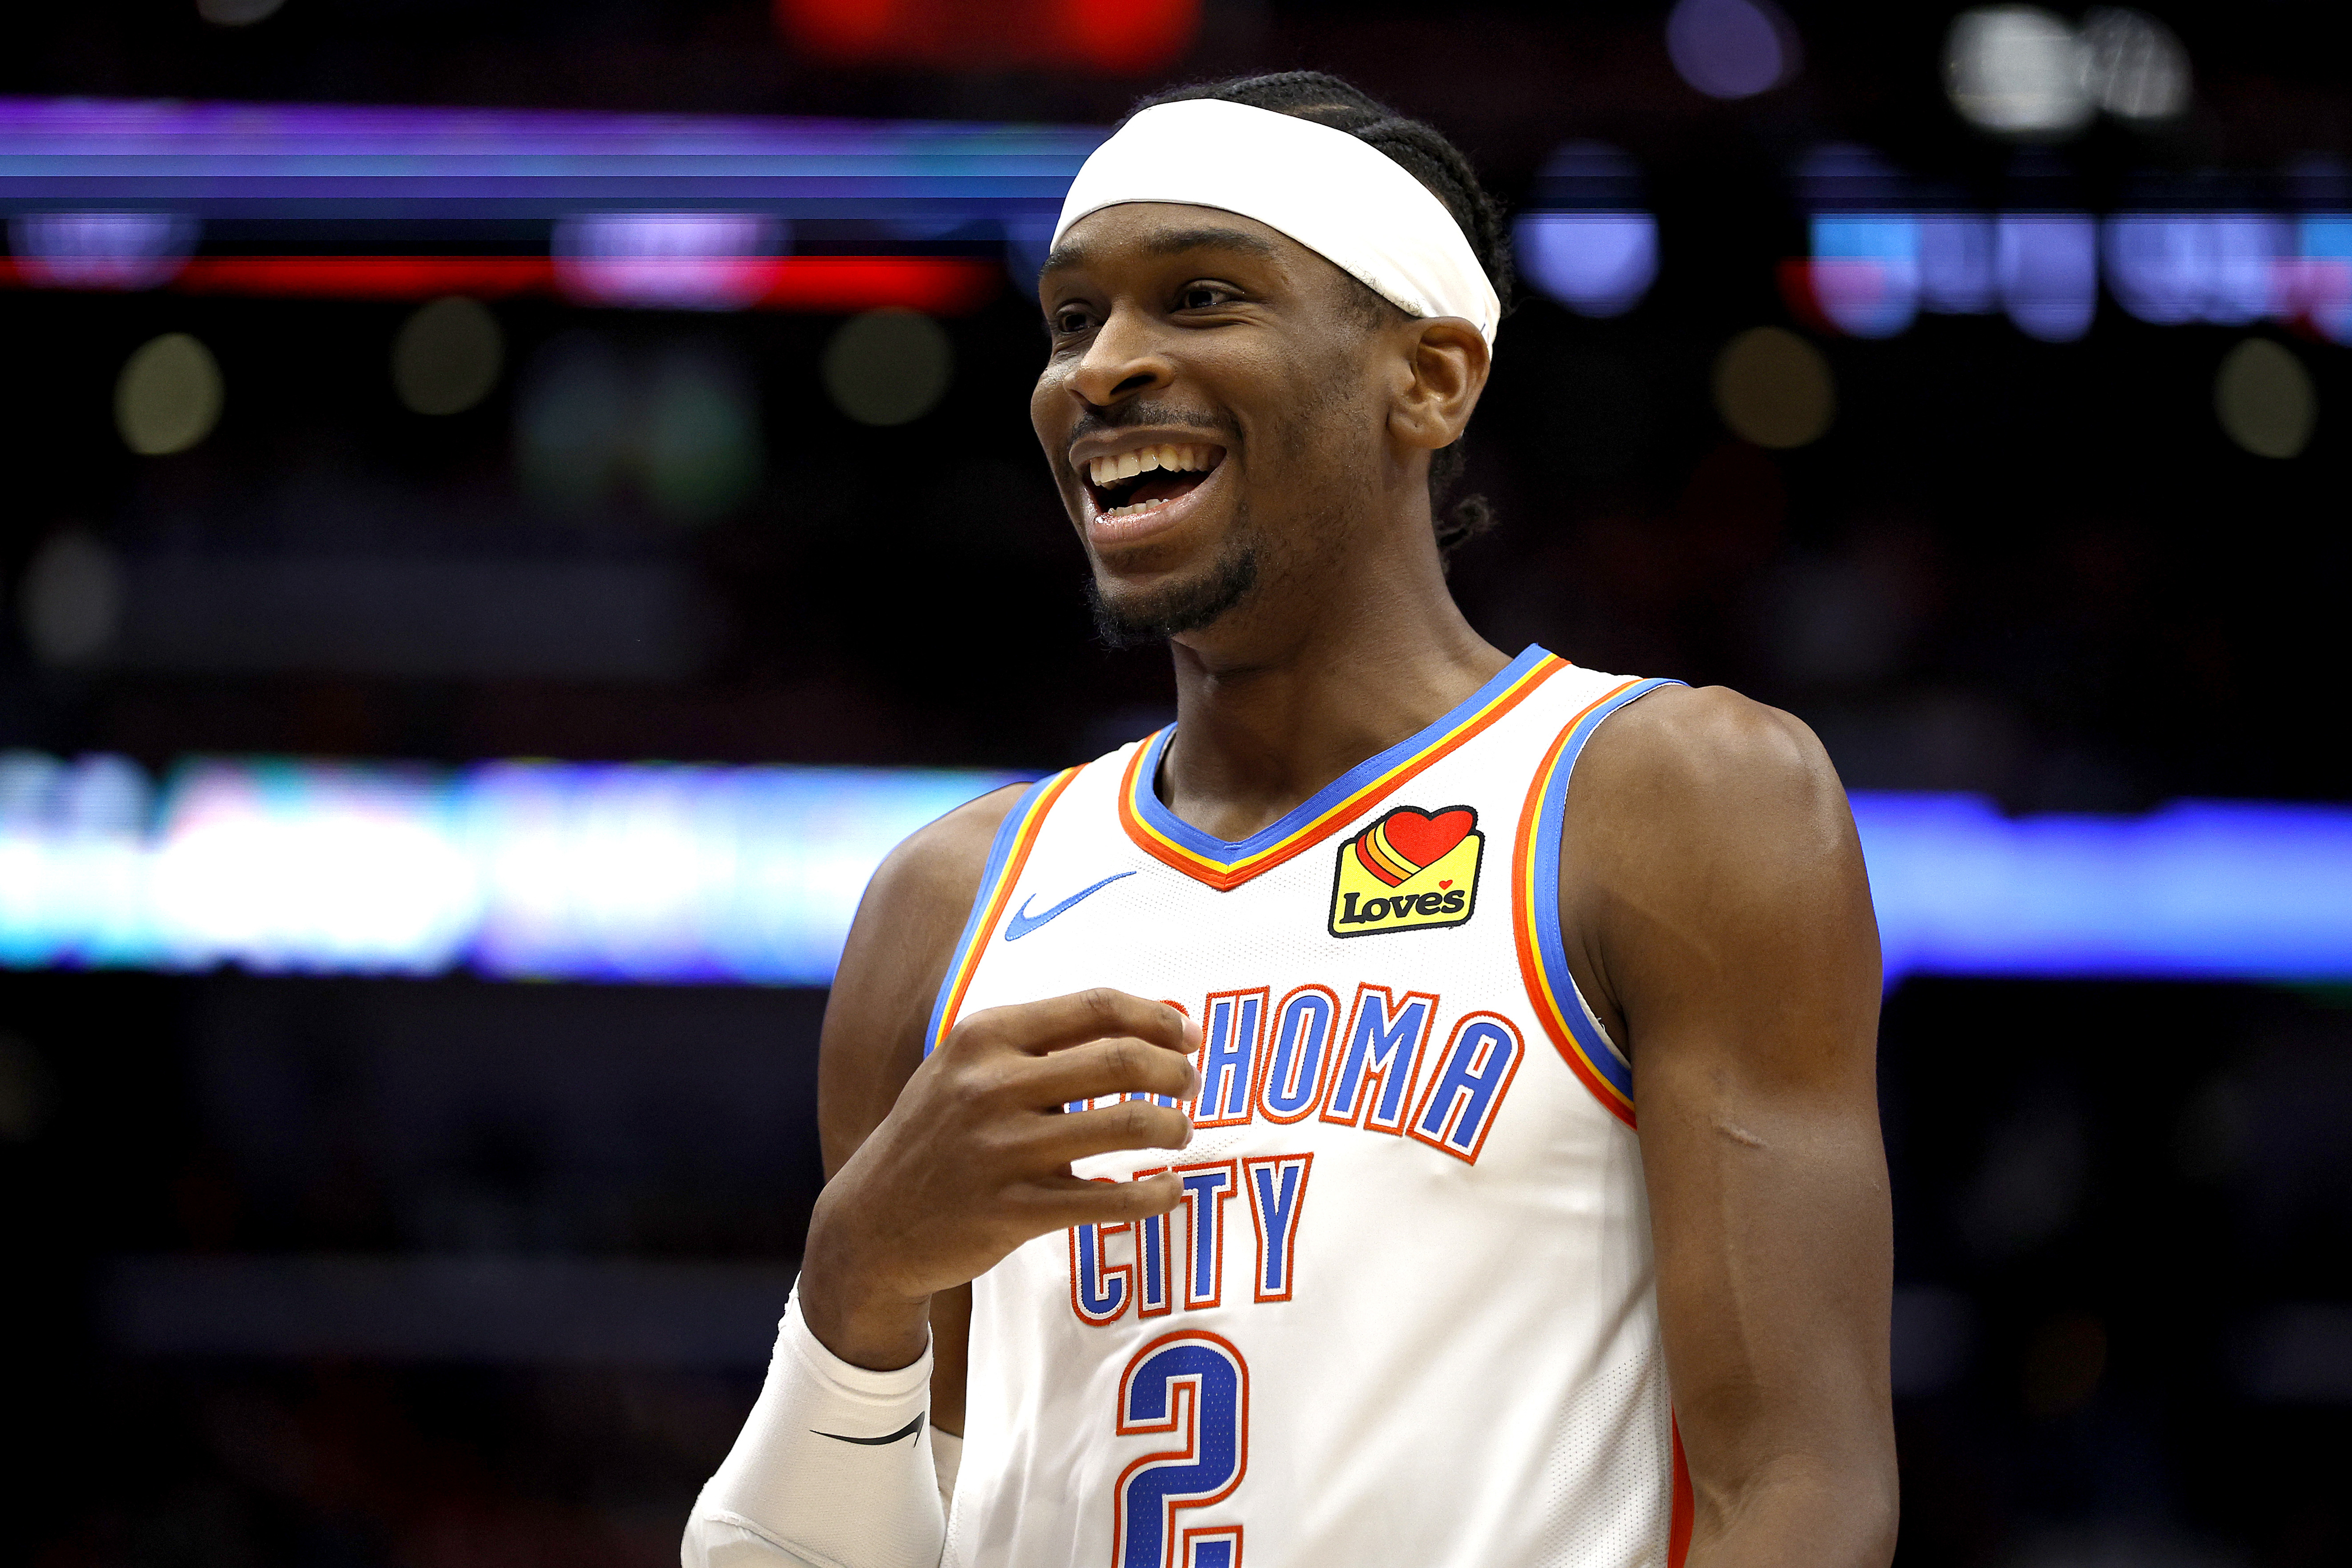 Basketball player in an Oklahoma City jersey, smiling with a headband on the court